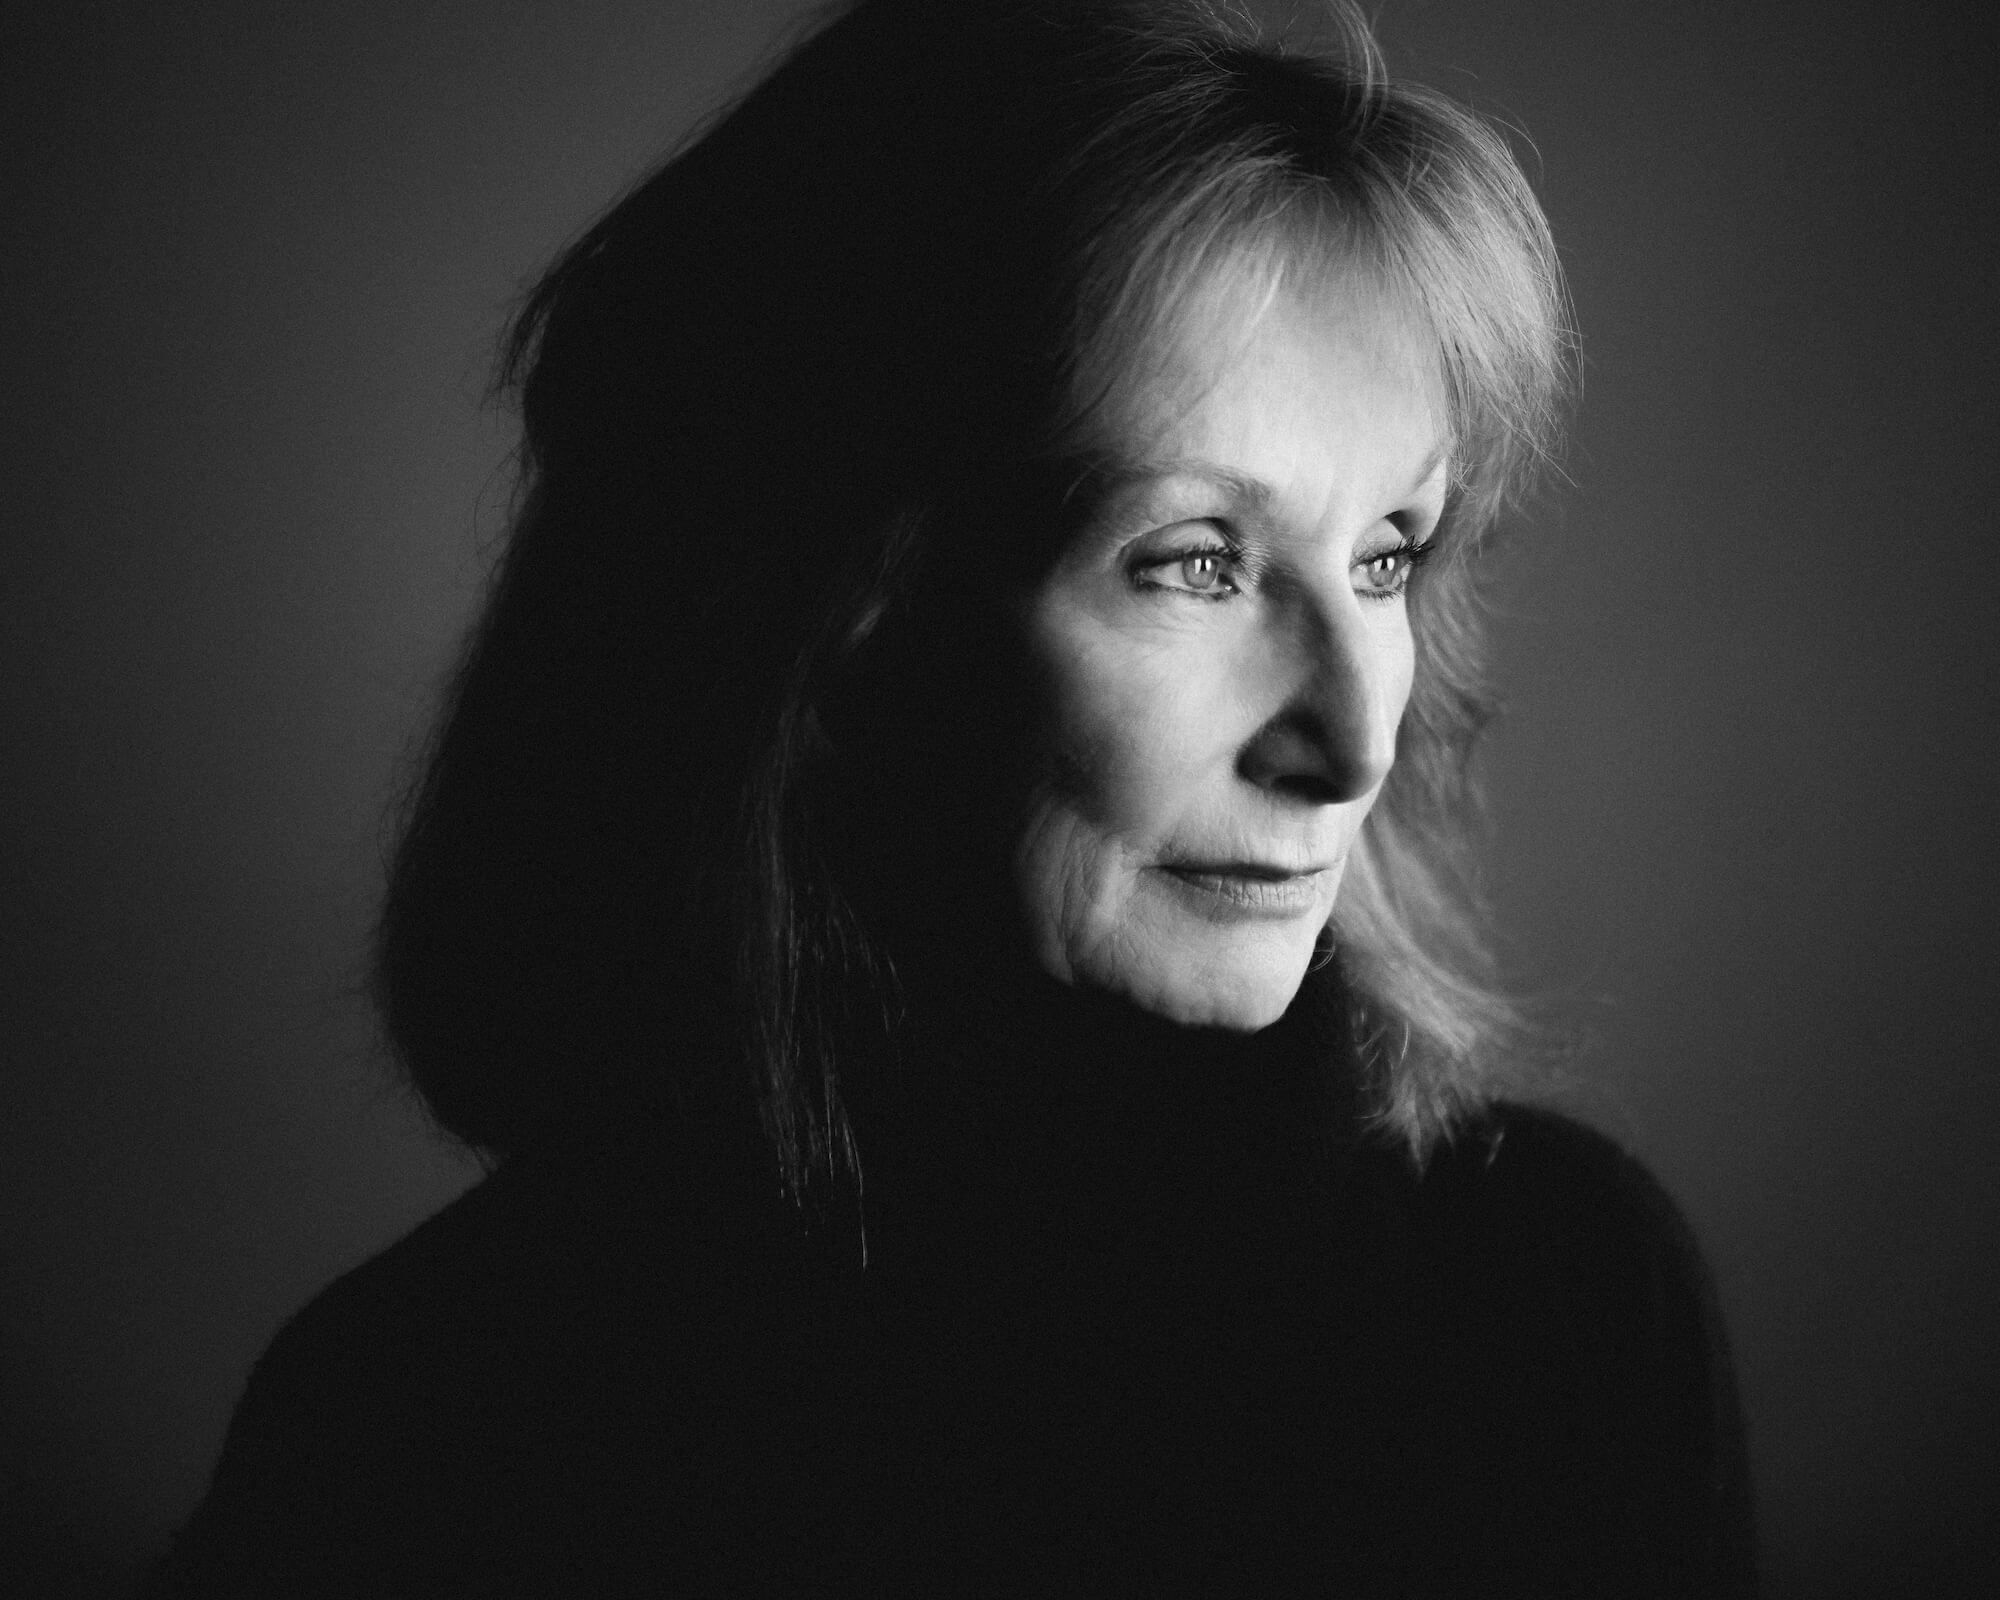 Maria Finitzo is looking off-camera. Black and white portrait.